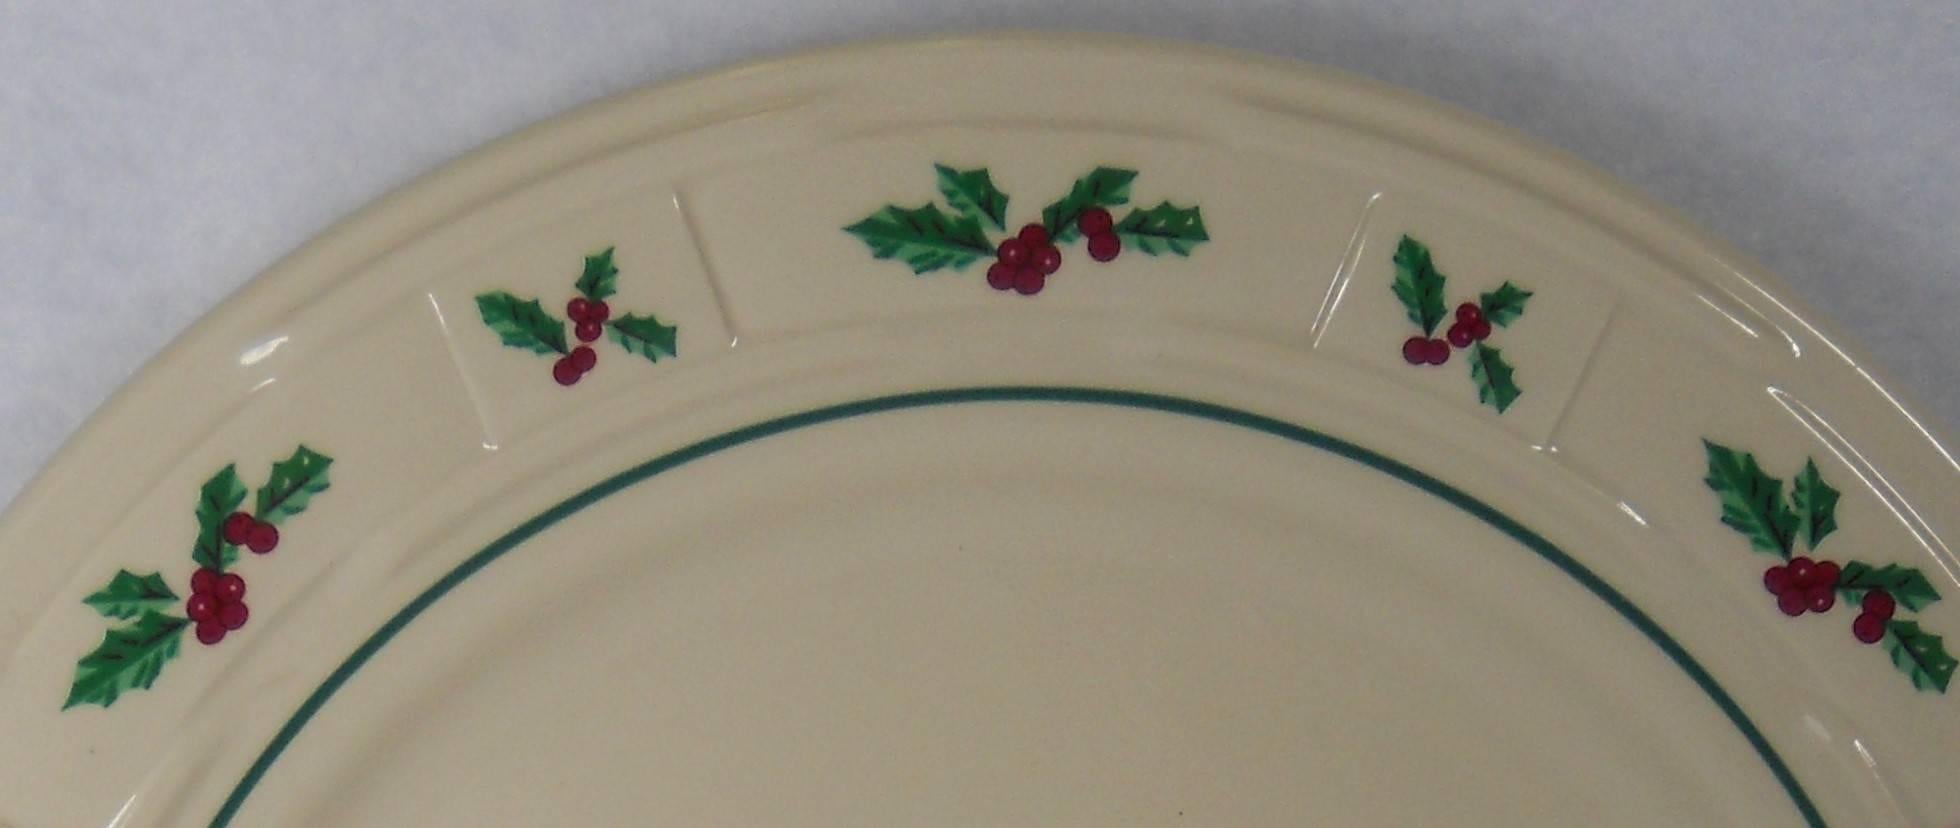 CHINA FINDERS 

China, Crystal, Flatware and Collectible Matching Service is offering ONE (1) 

LONGABERGER company HOLLY pattern Stackable Soup or Cereal Bowl

in great condition free from cracks, stain, or discoloration and with only a